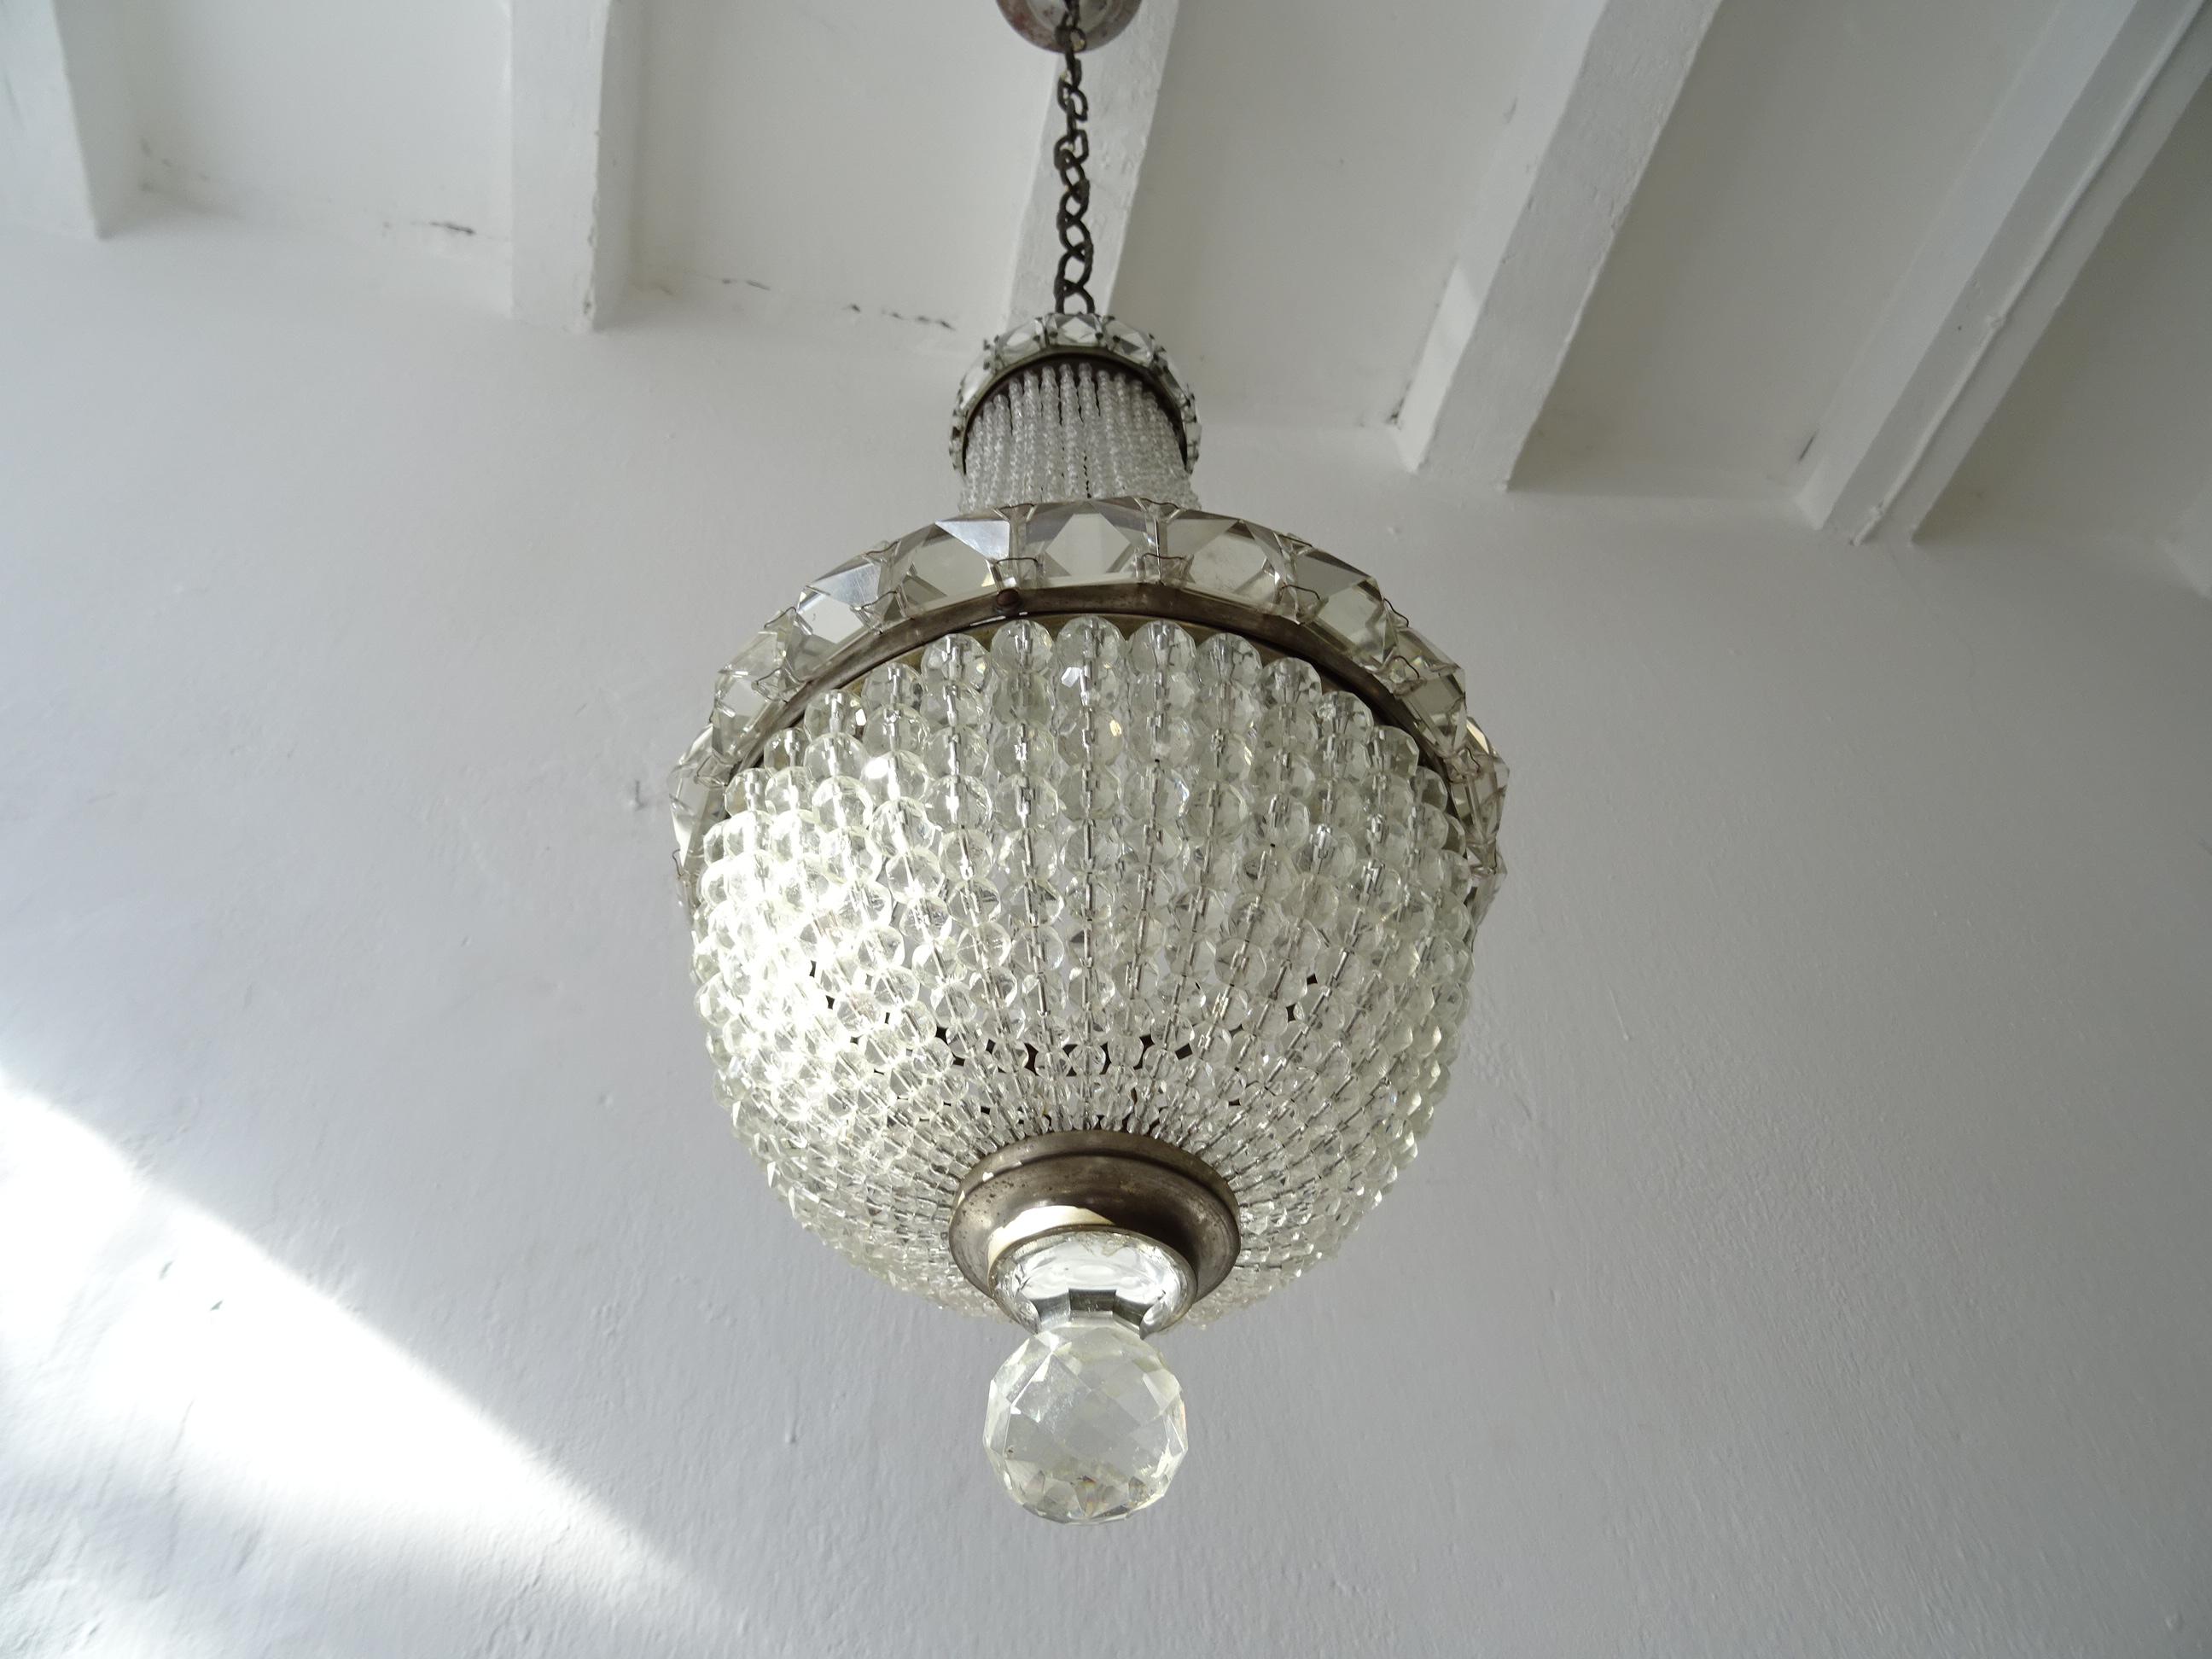 Beautiful Czechoslovakian Crystal Beaded Empire Dome Chandelier circa 1900 In Good Condition For Sale In Firenze, Toscana